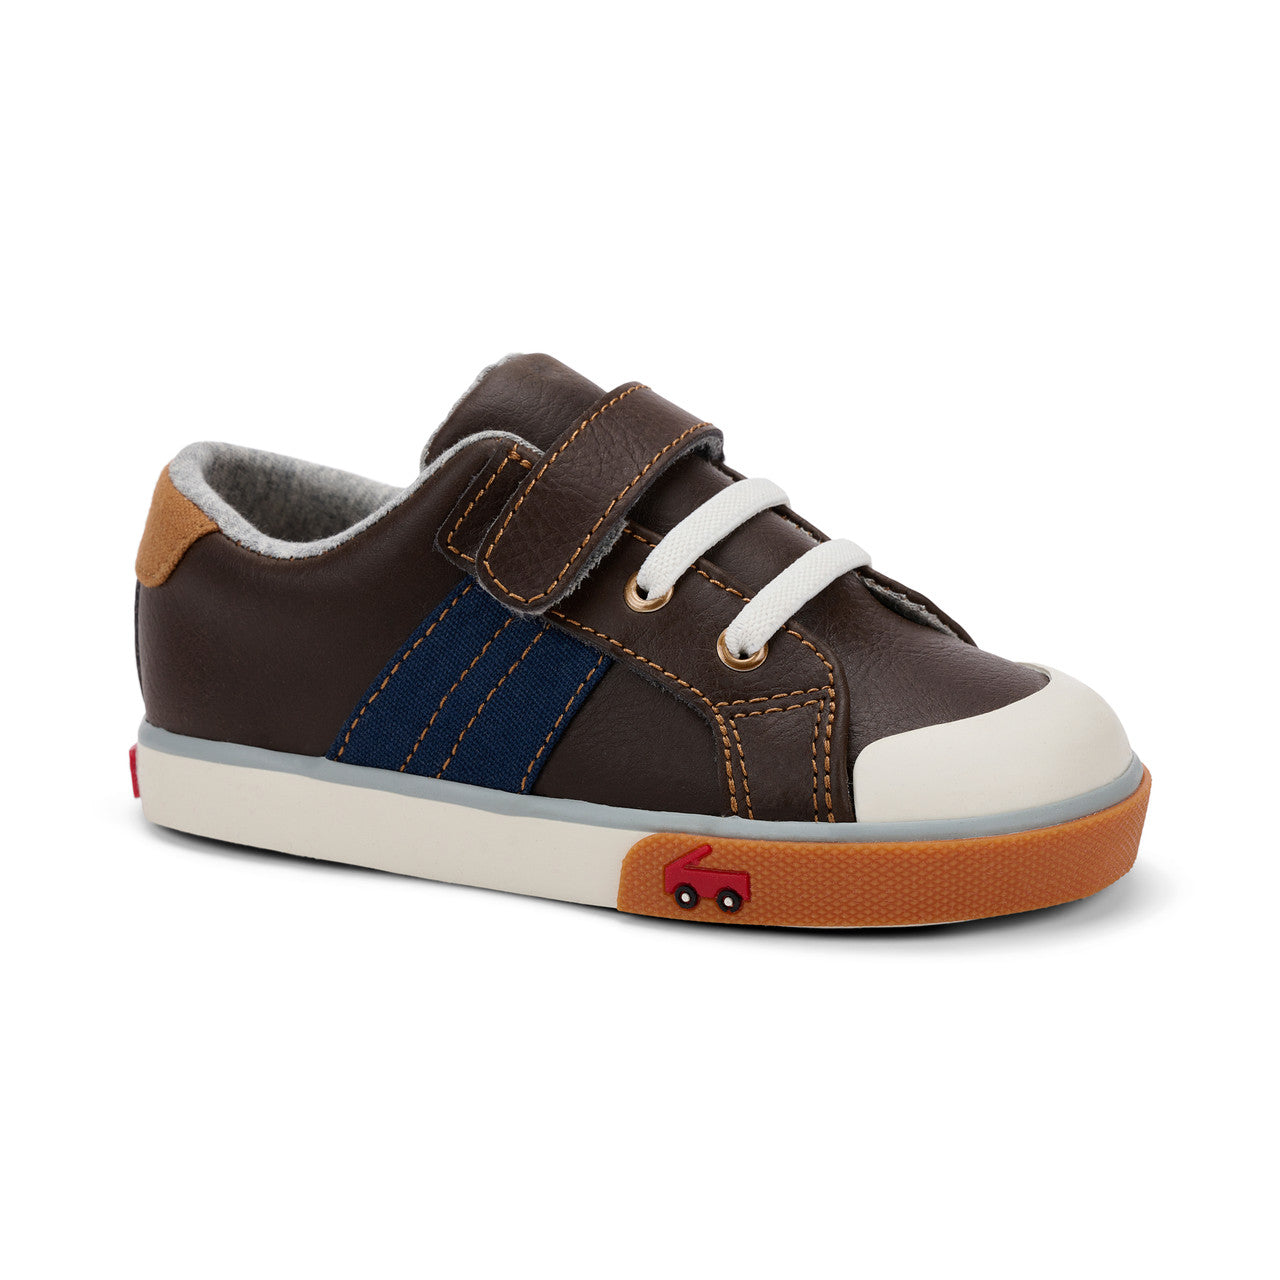 Lucci Kid's Leather Sneaker - Brown/Navy